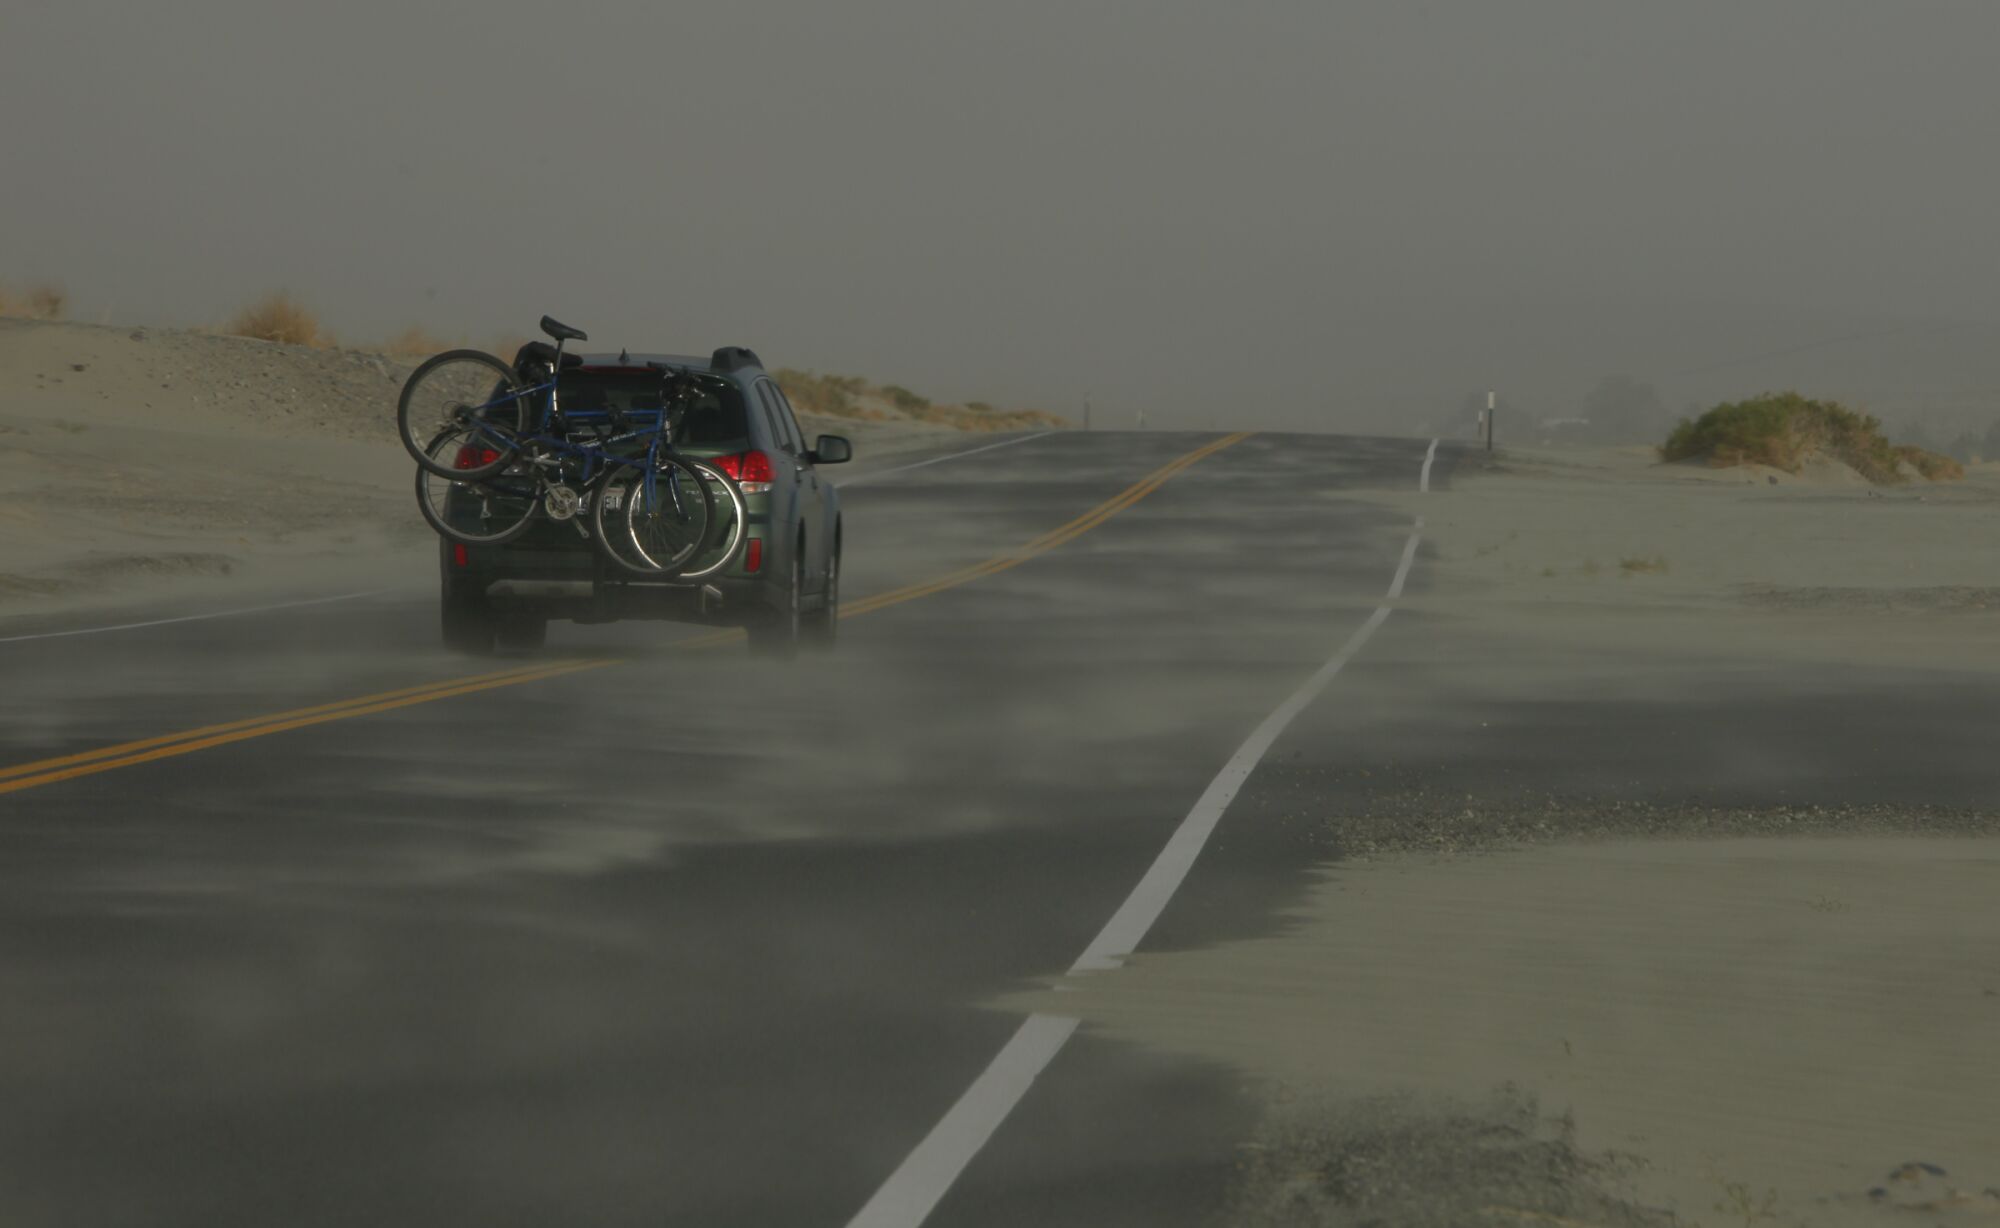 The road along old Highway 136 bound for Keeler, California, is blocked by drifting dust.